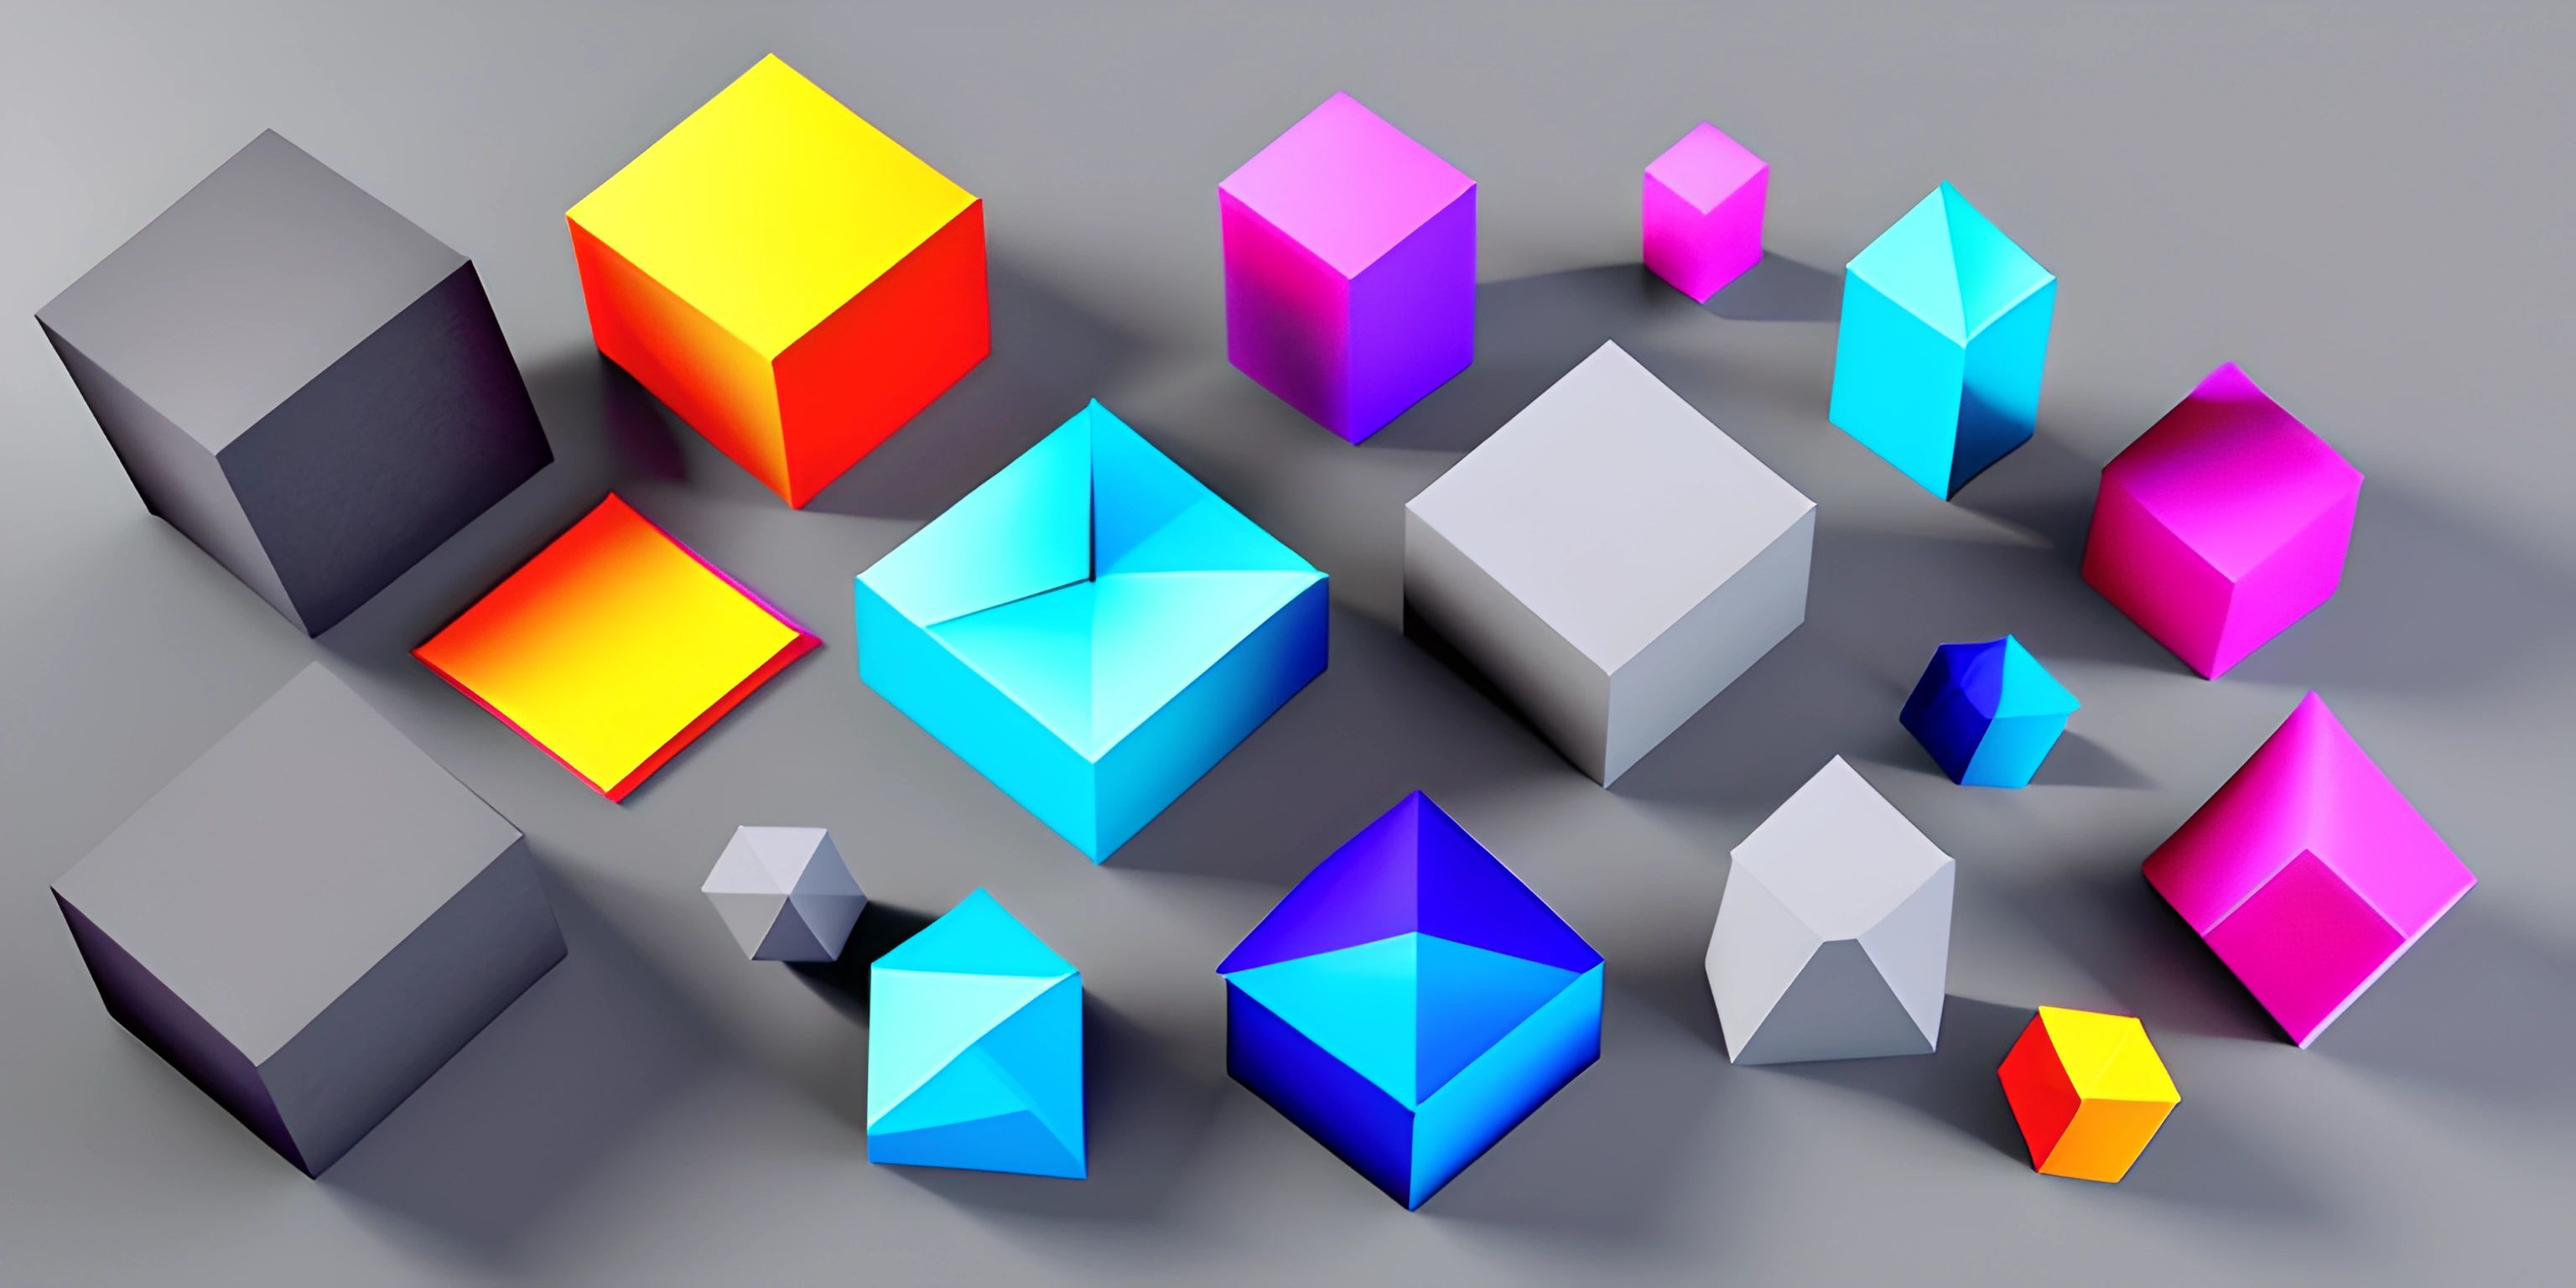 the 3d rendered object is multicolored and has square shapes all around it and appears to be arranged